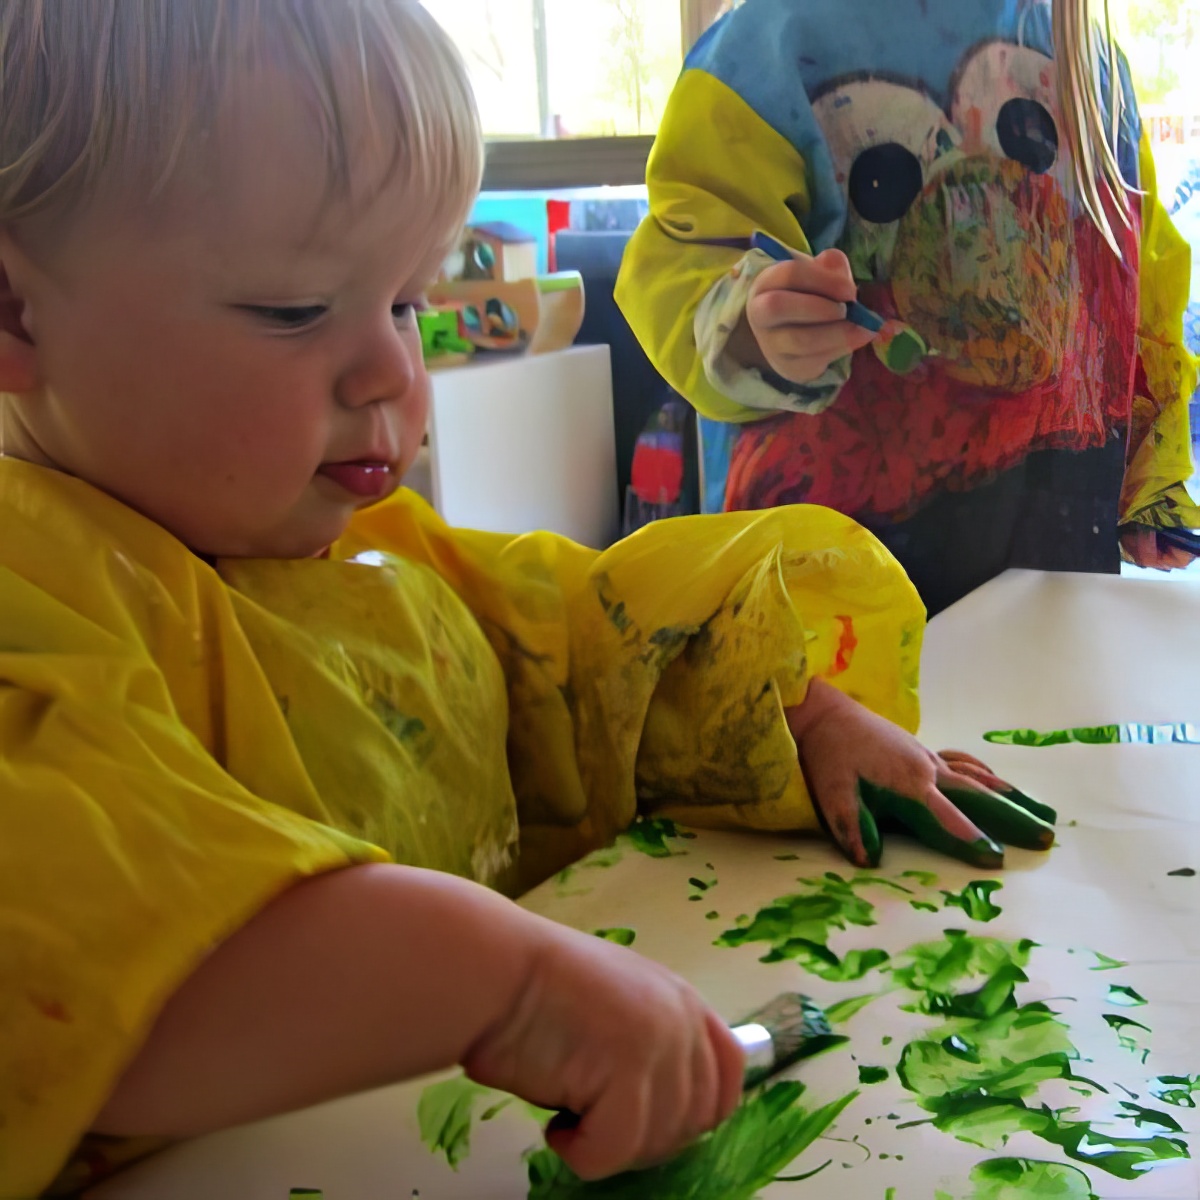 single color painting, fun art activities for 2-year-olds, toddler fun arts and crafts